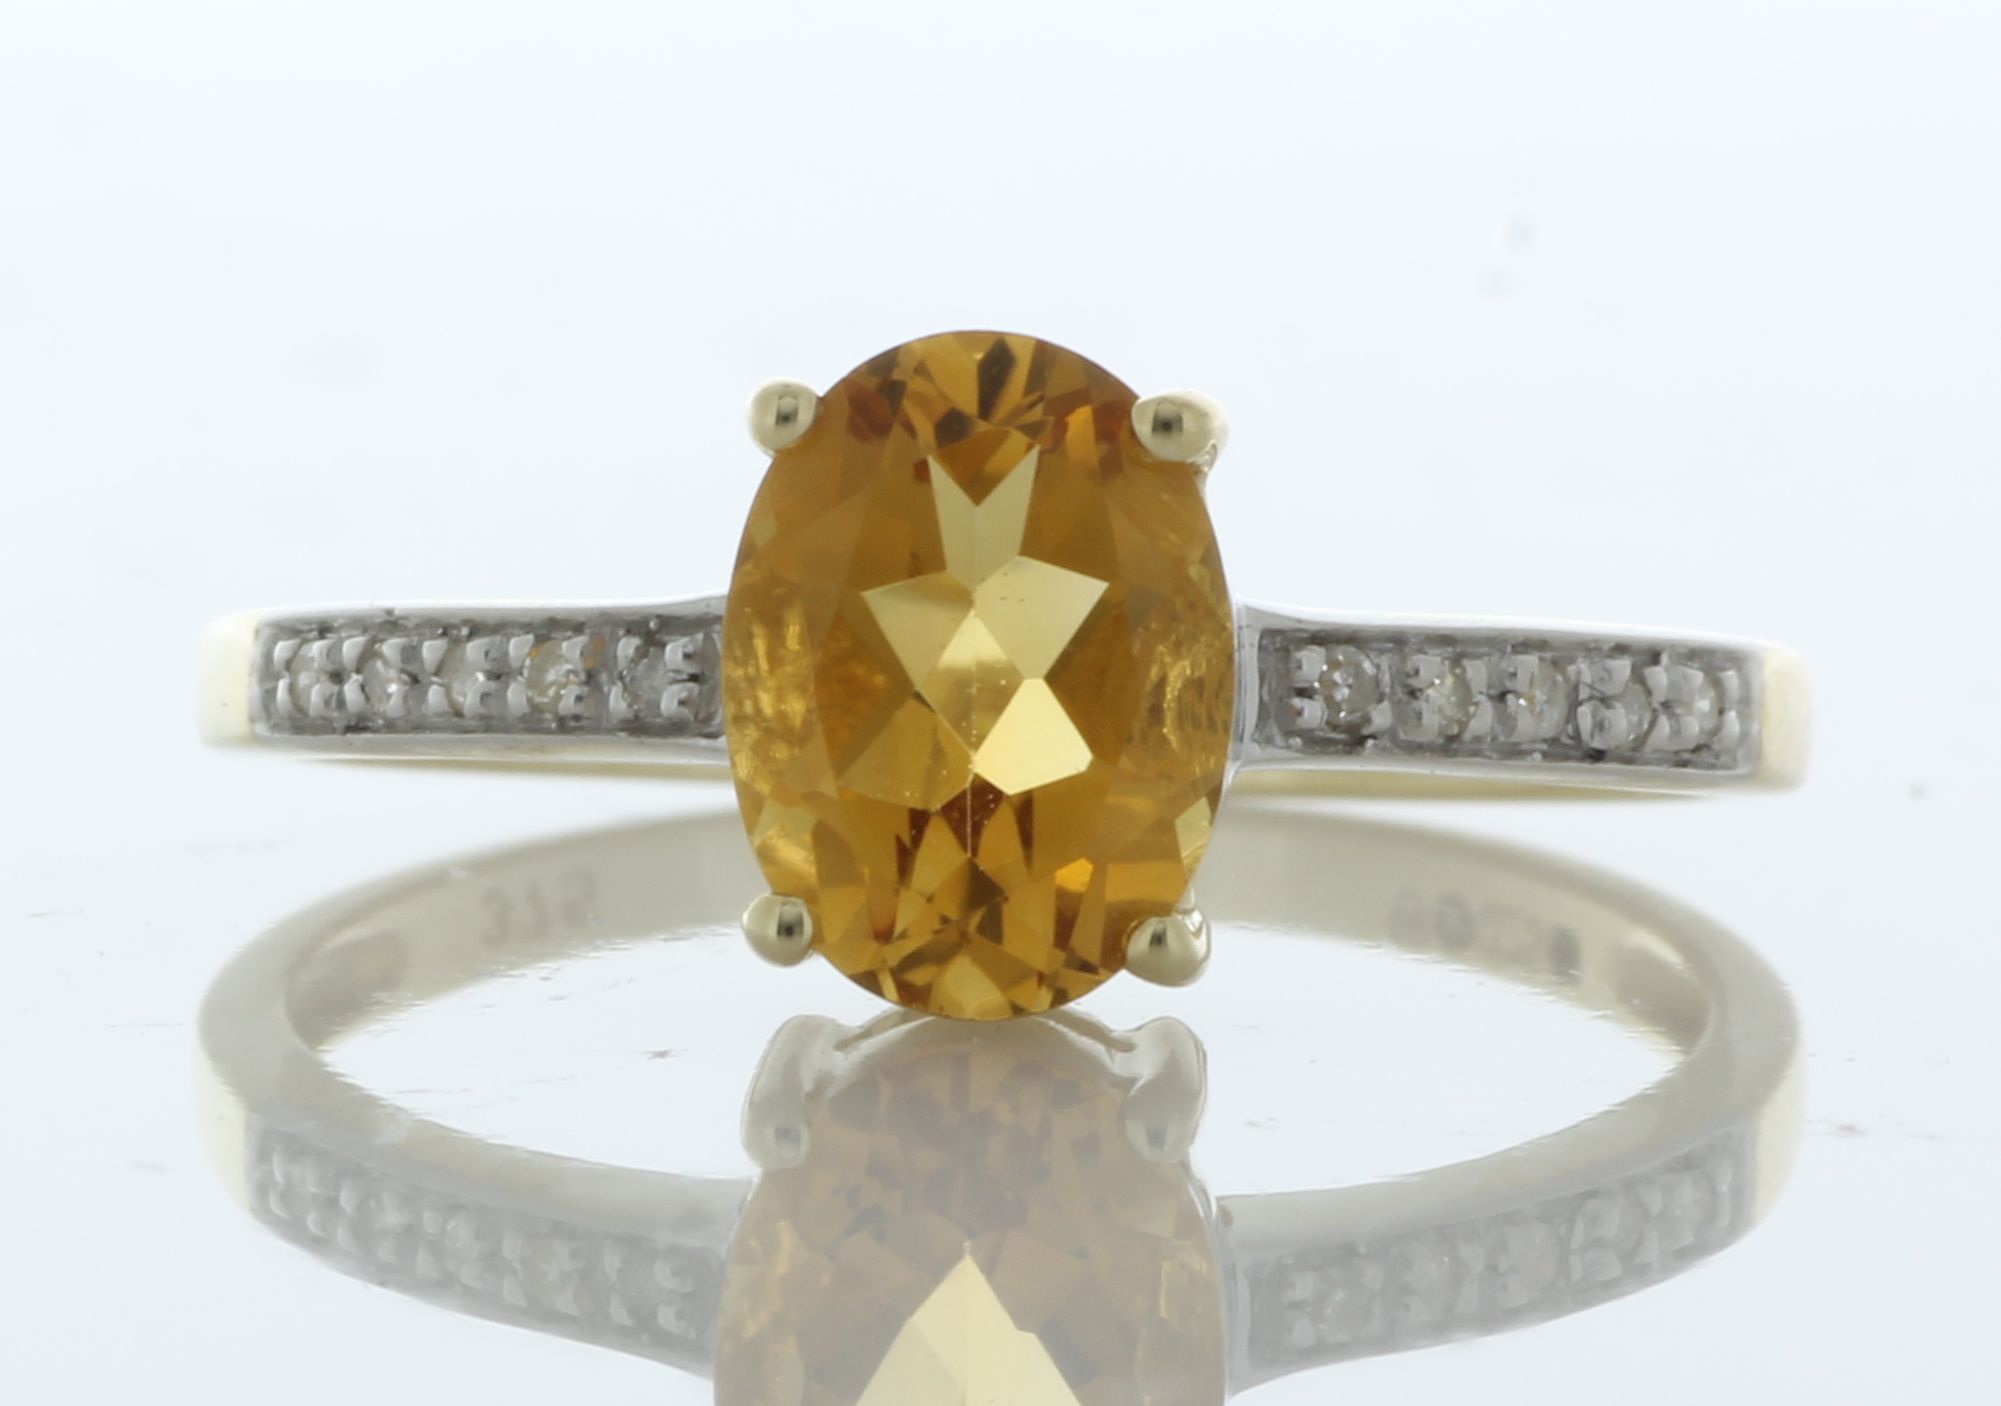 9ct Yellow Gold Diamond and Citrine Ring (C1.09) 0.04 Carats - Image 3 of 4